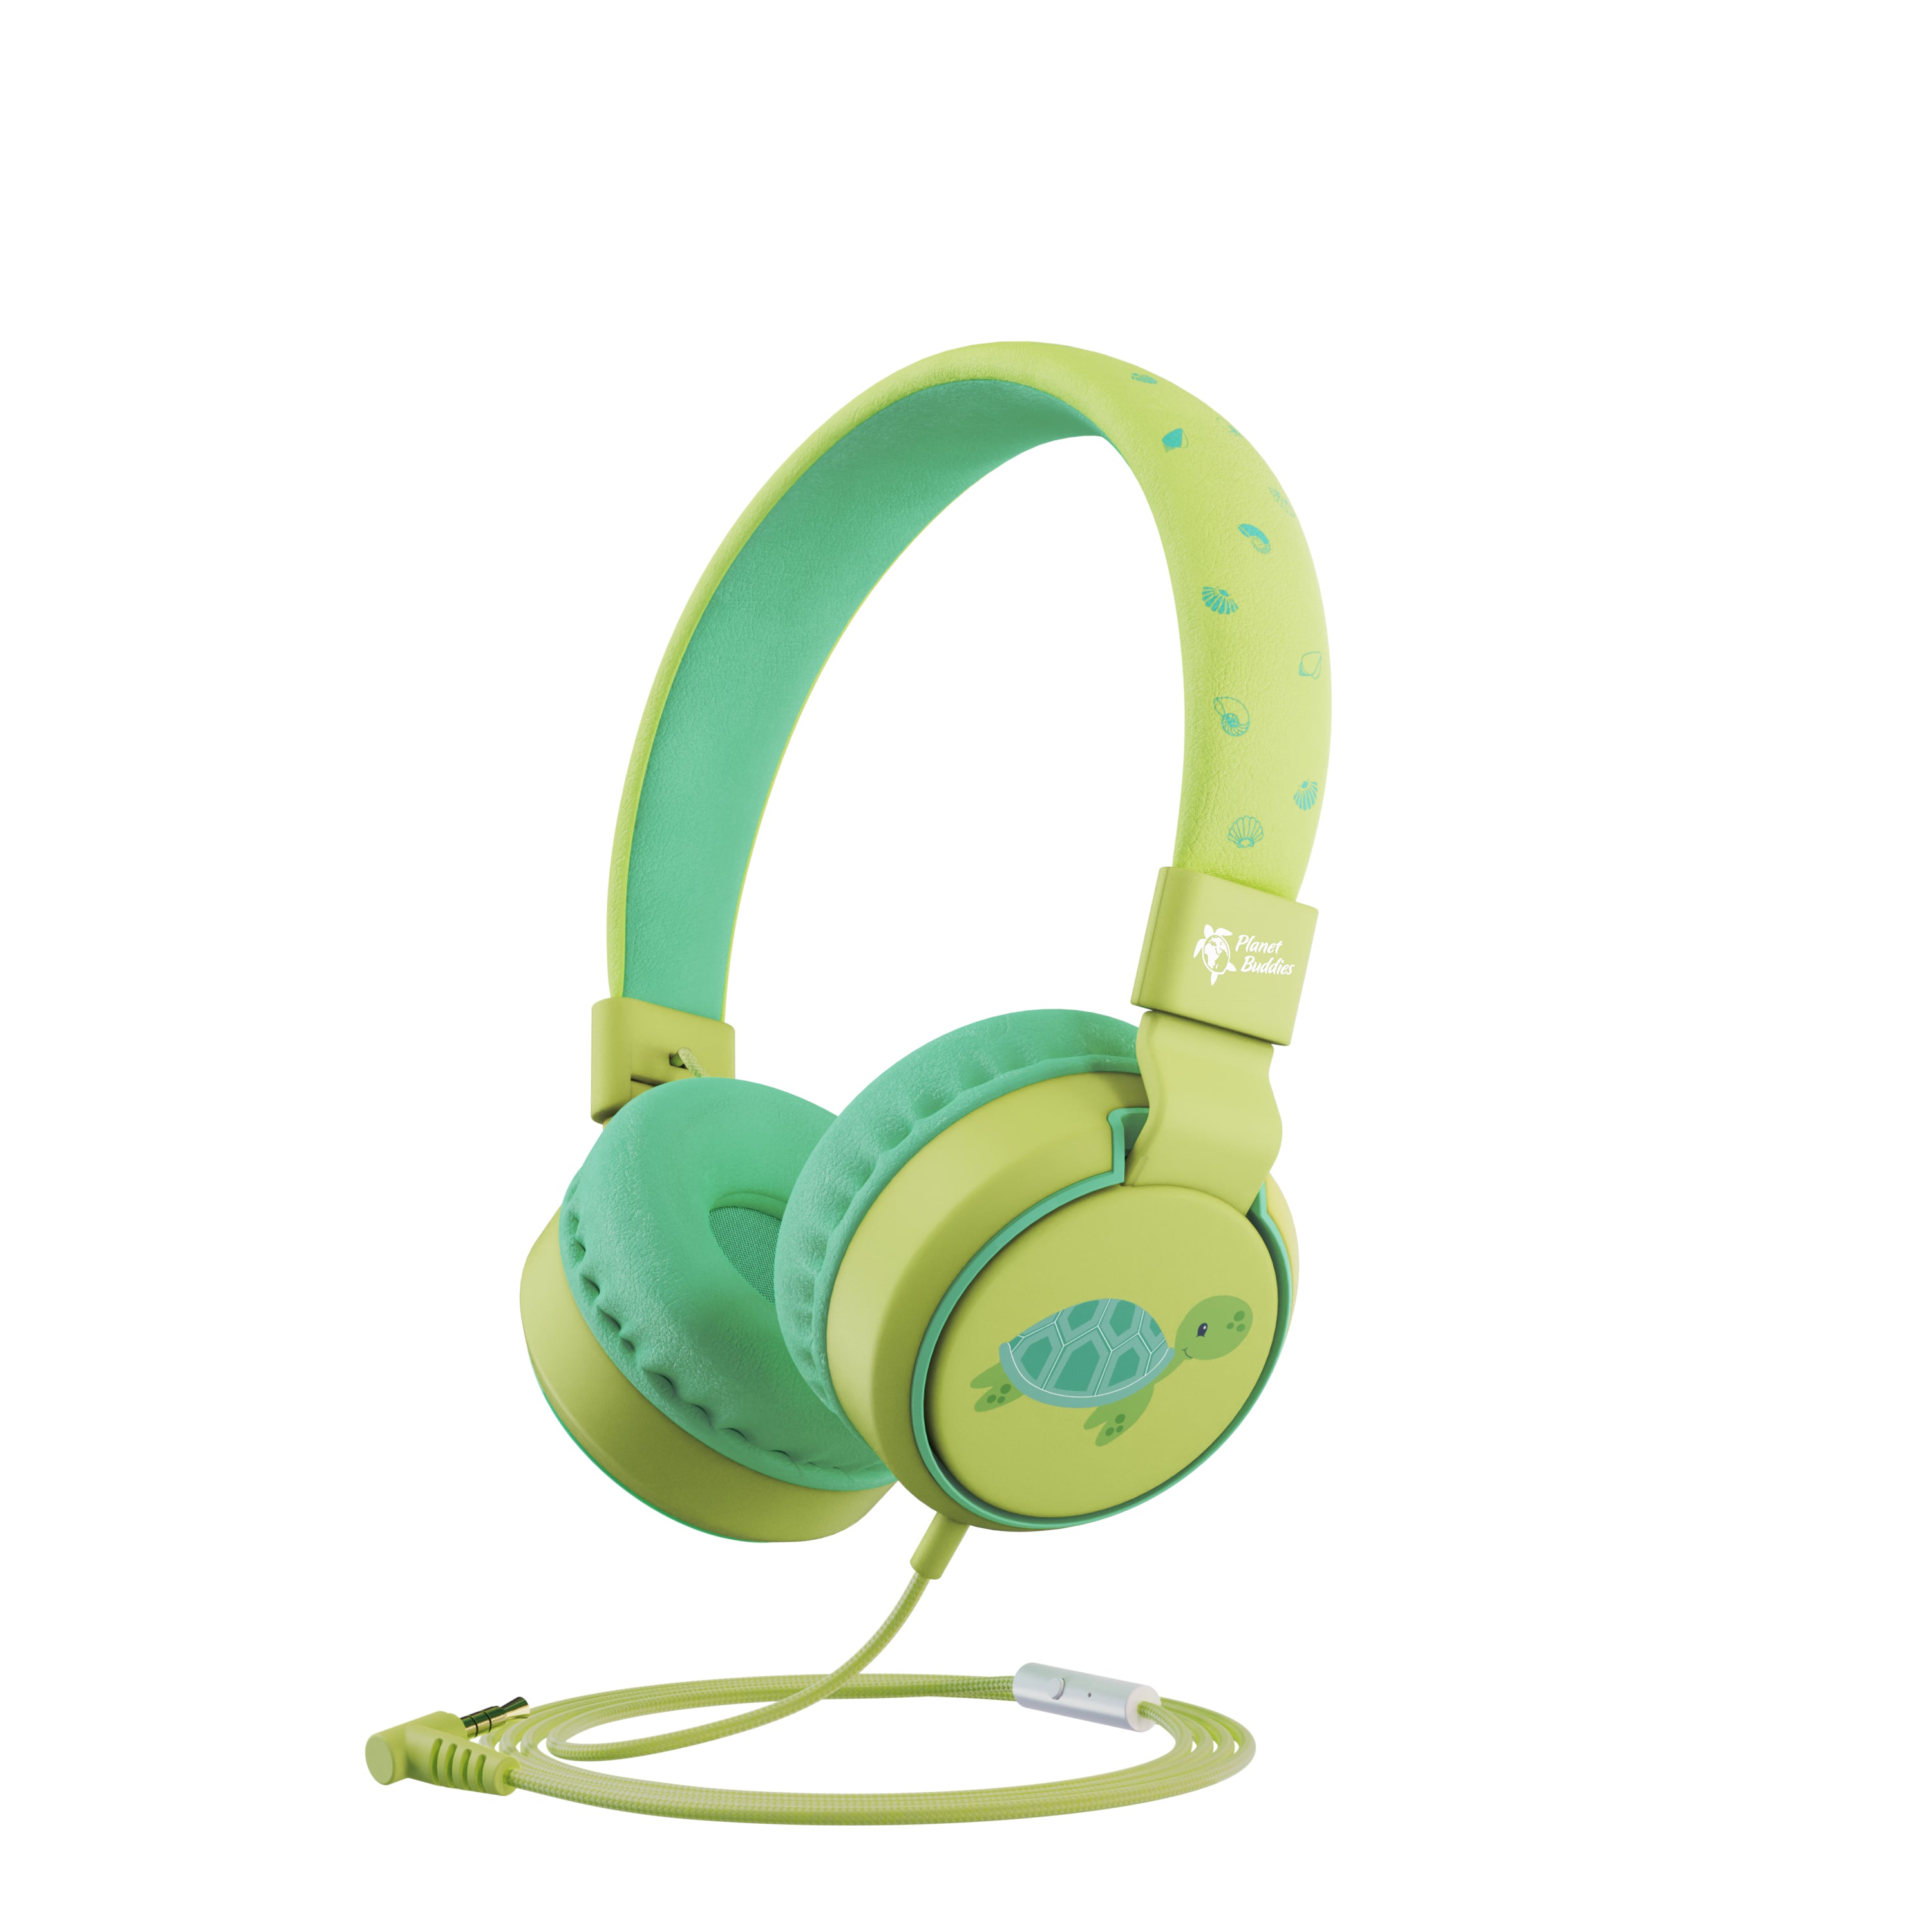 Milo the Turtle Wired Headphones – Recycled EU Buddies Planet